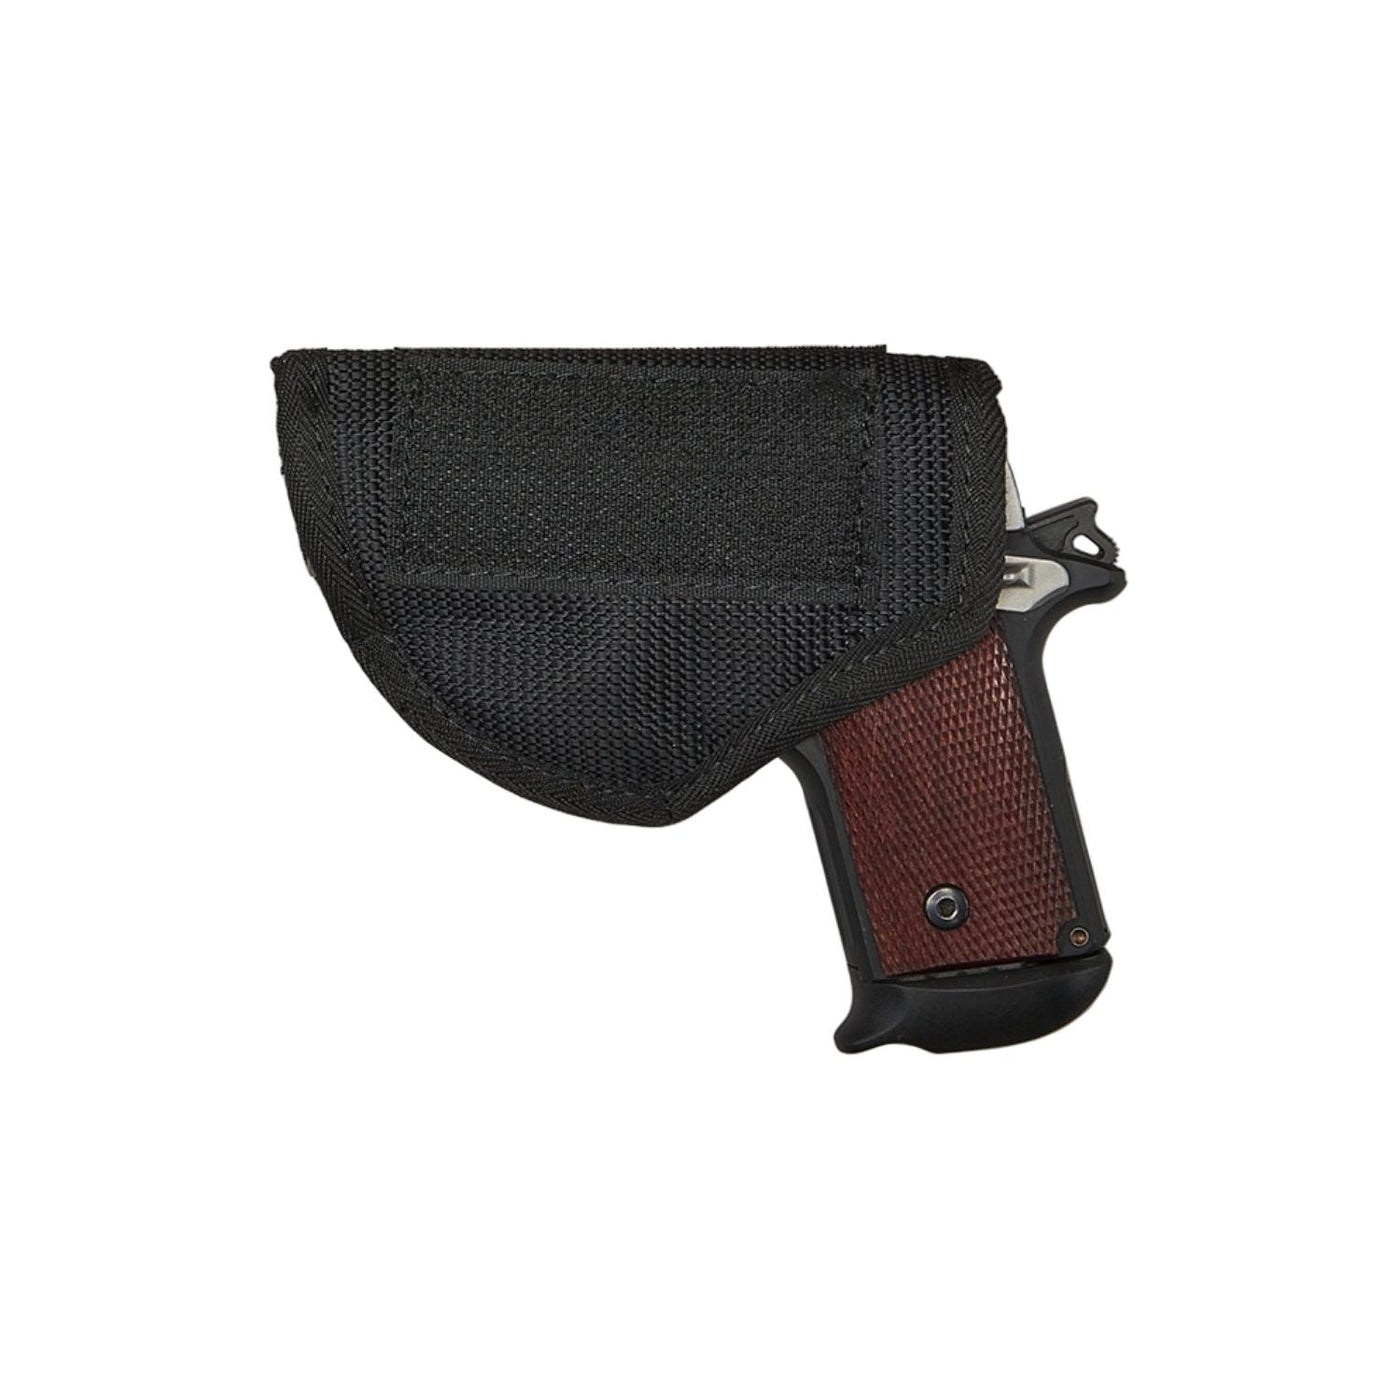 Concealed Carry Gun Holsters - Lady Conceal - Velcro Holster - Universal Holster sizes